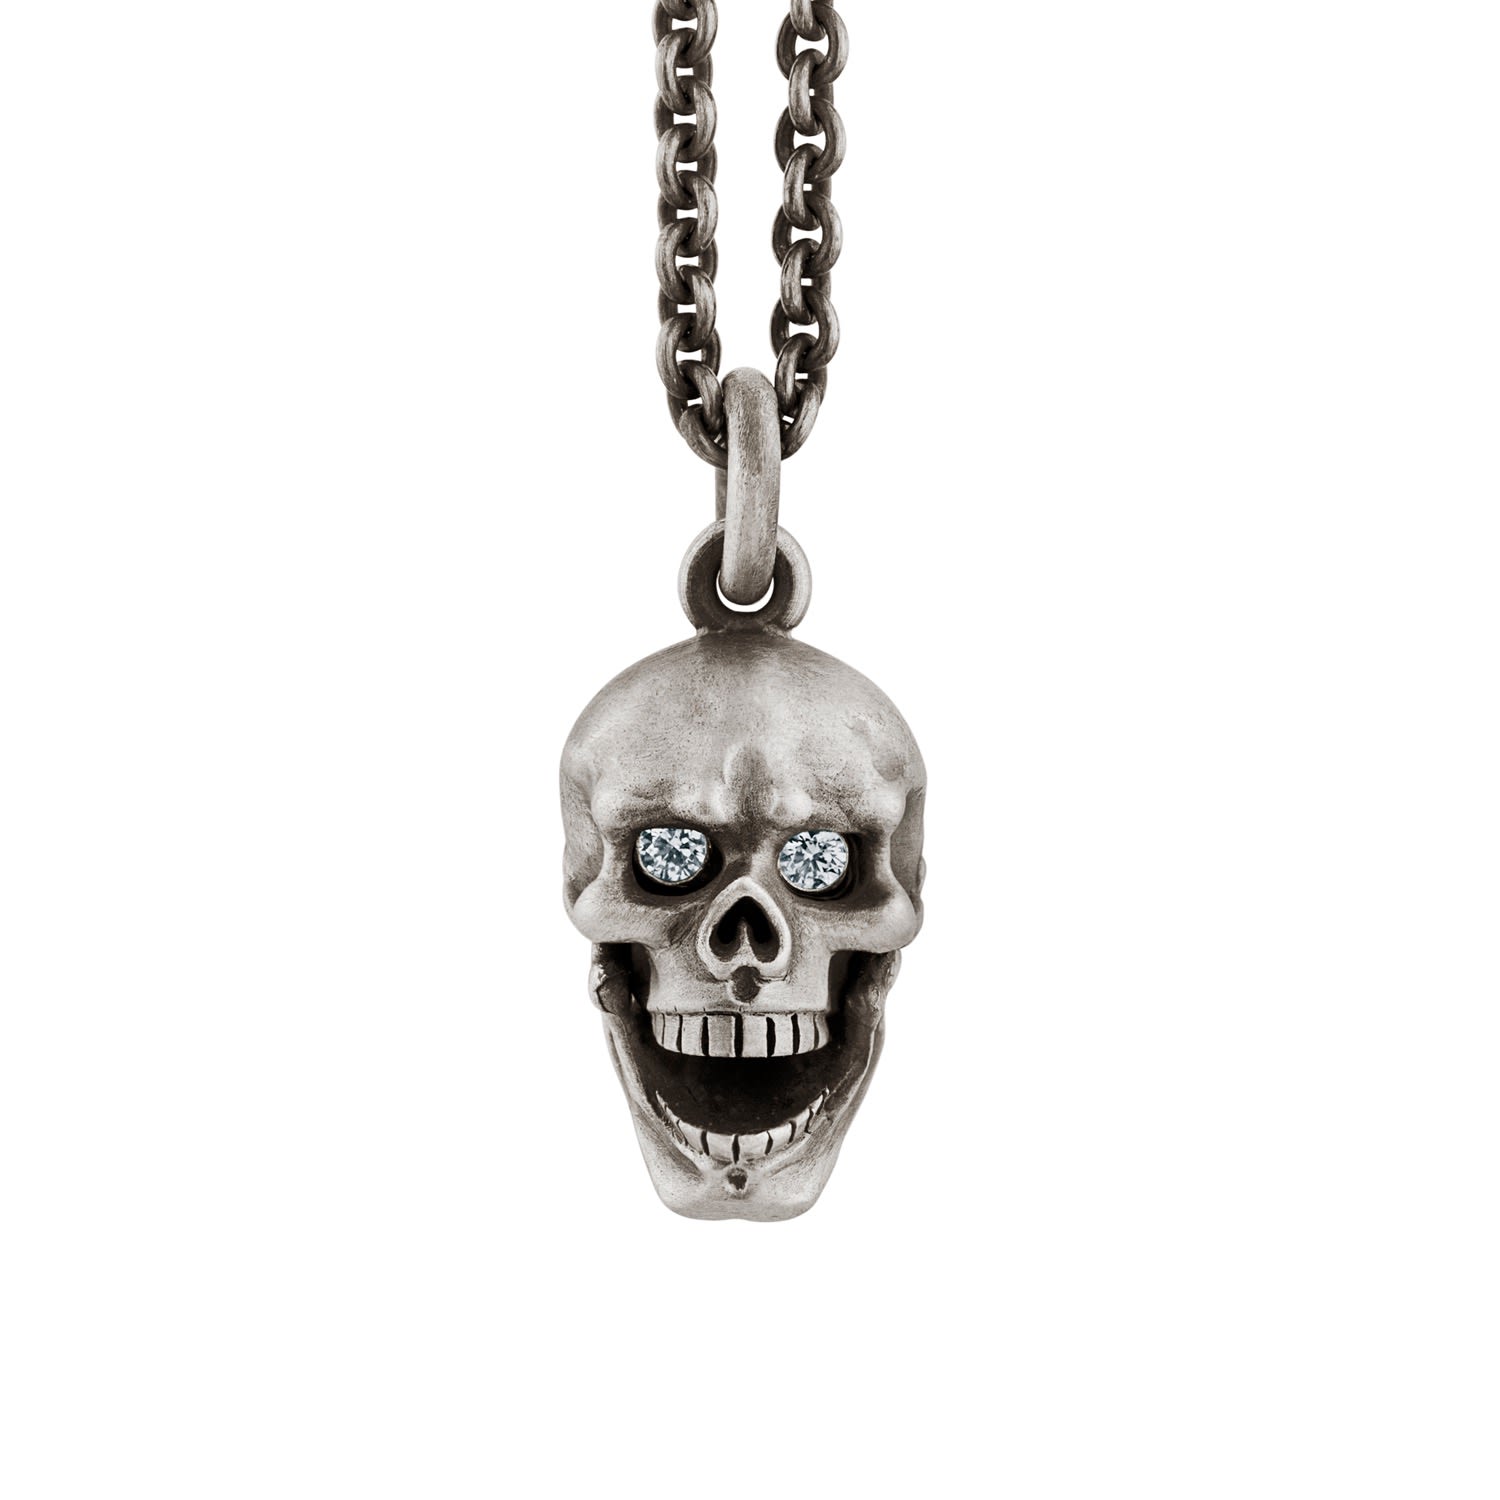 Men's Skull Pendant With Hinged Jaw And Diamond Eyes In Sterling Silver Snake Bones